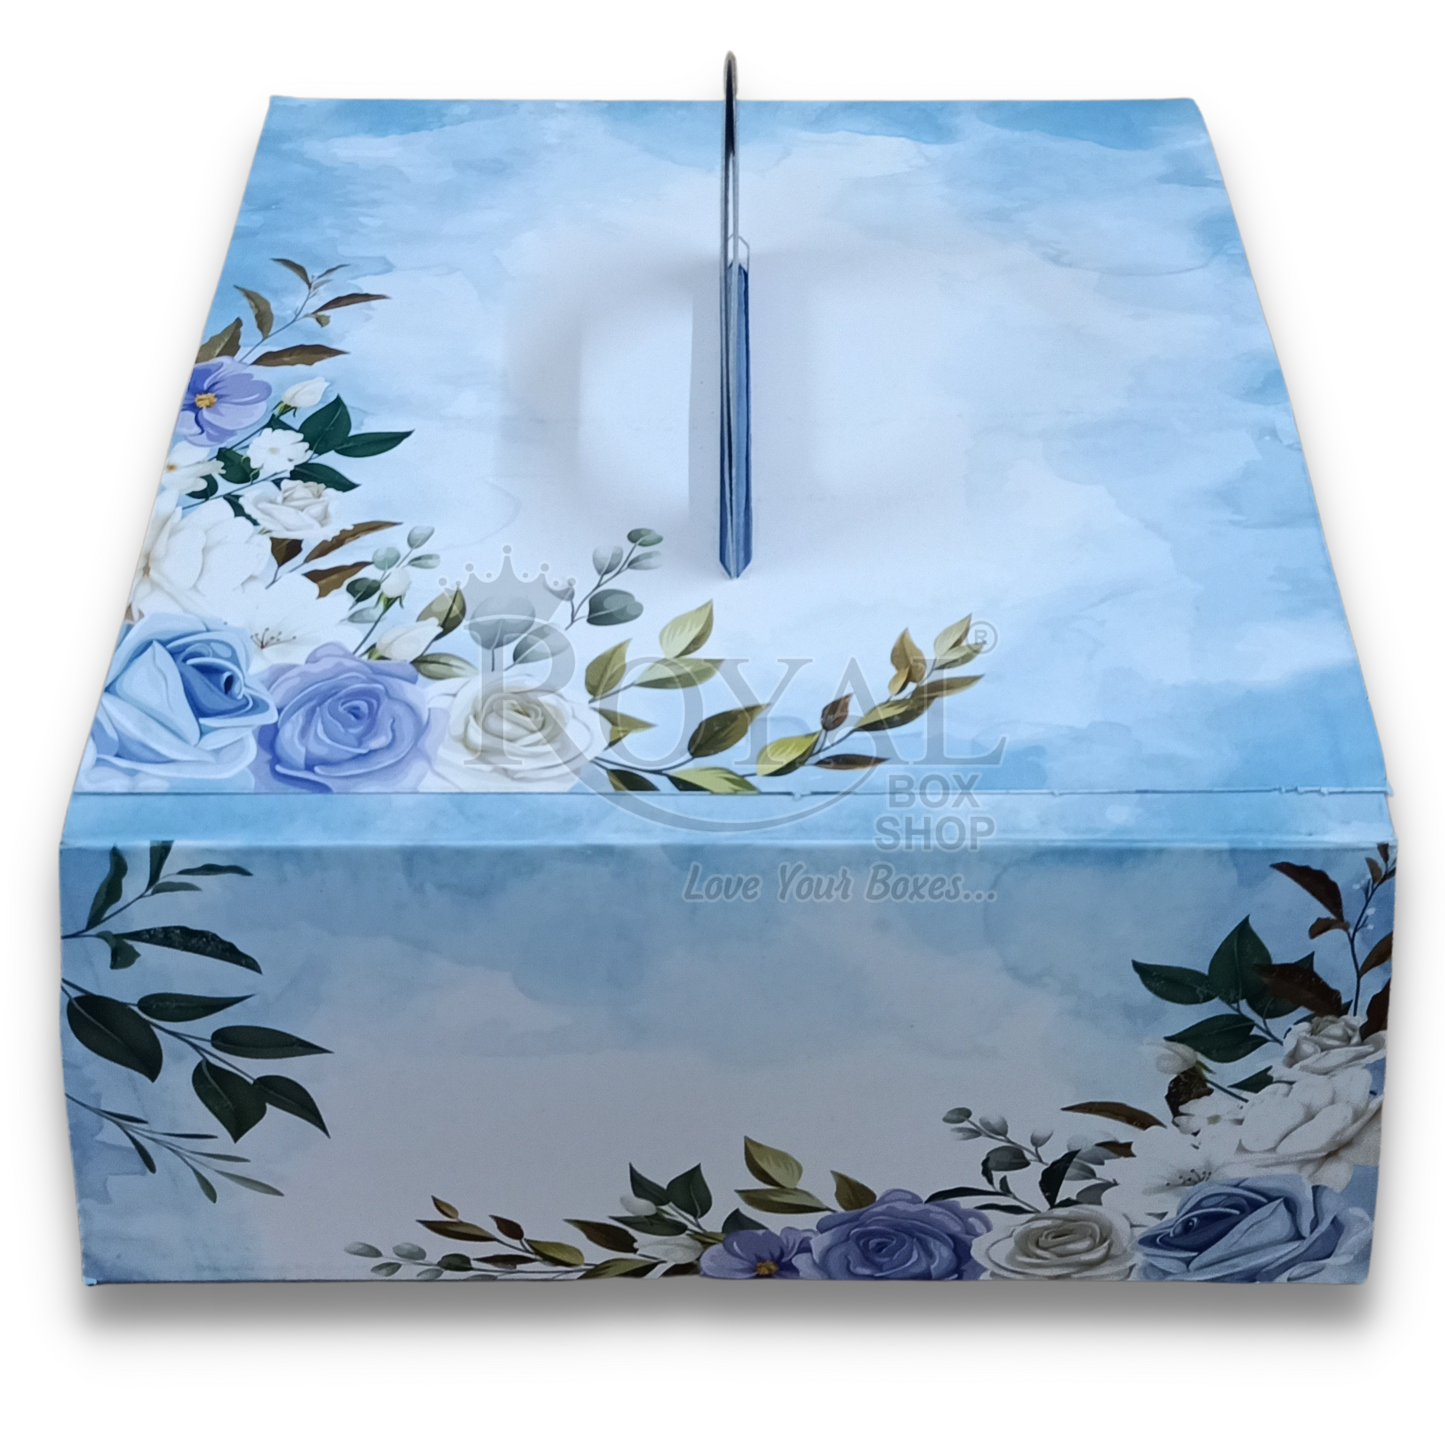 Cake Box with Handle - 10 x 10 x 5 inch - Blue - Dome Style Royal Box Shop